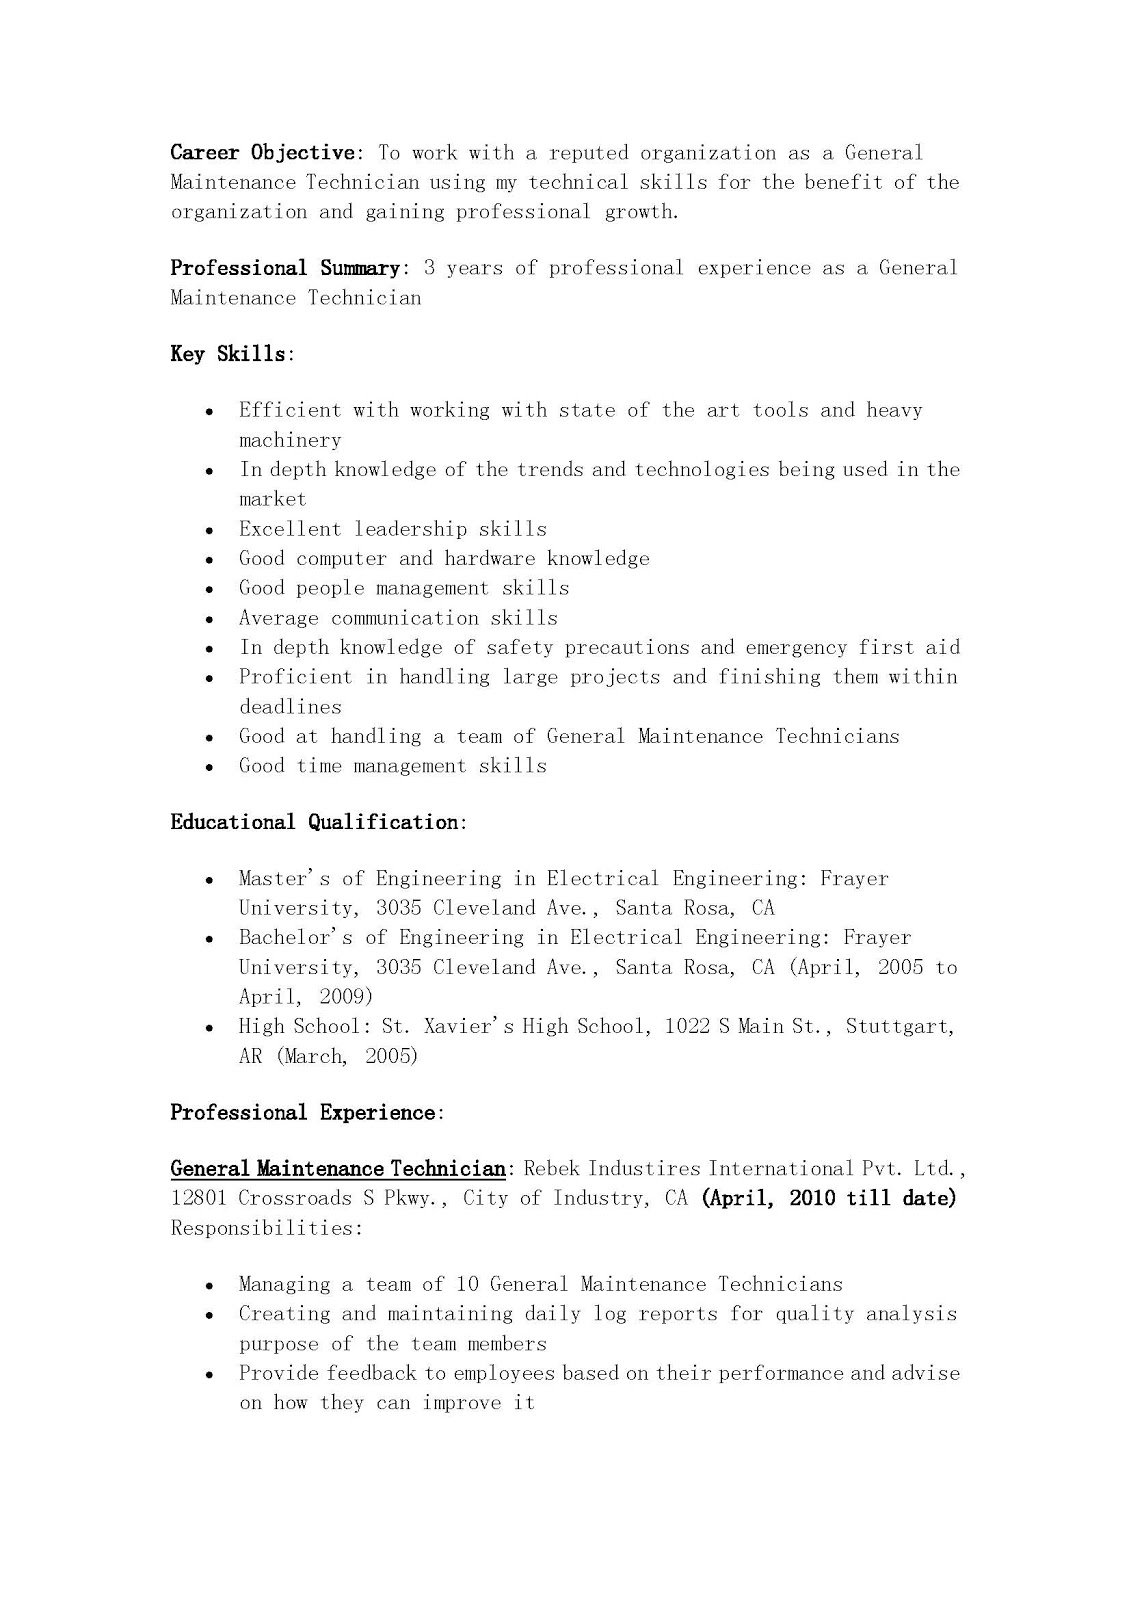 Sample resume for a c technician